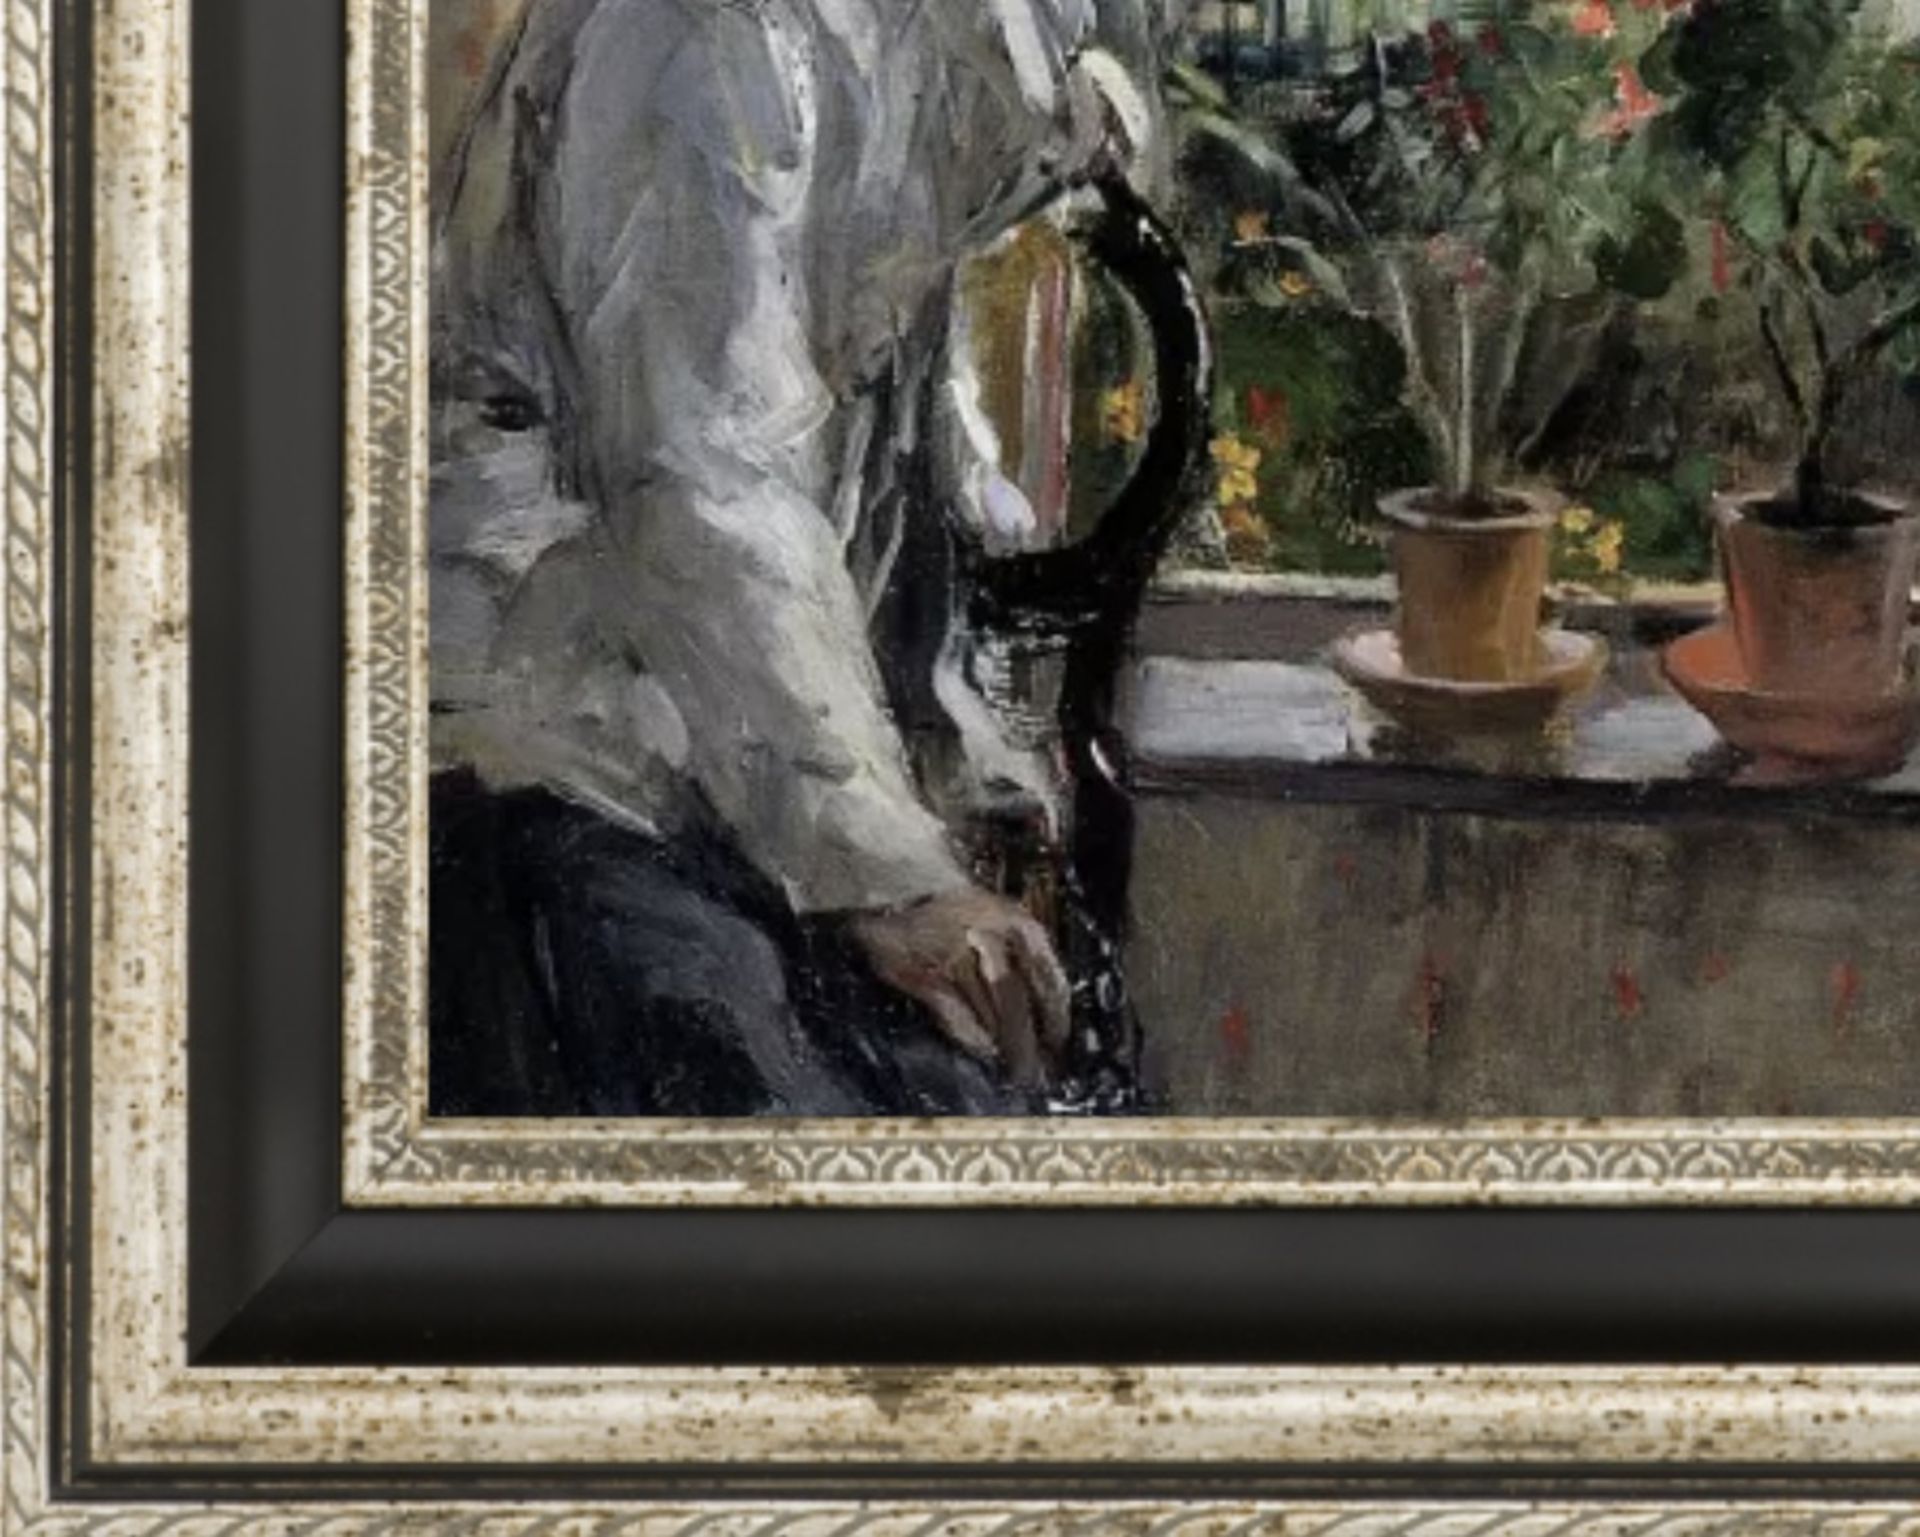 Berthe Morisot "Eugene Manet, Isle of Wight" Oil Painting - Image 5 of 5